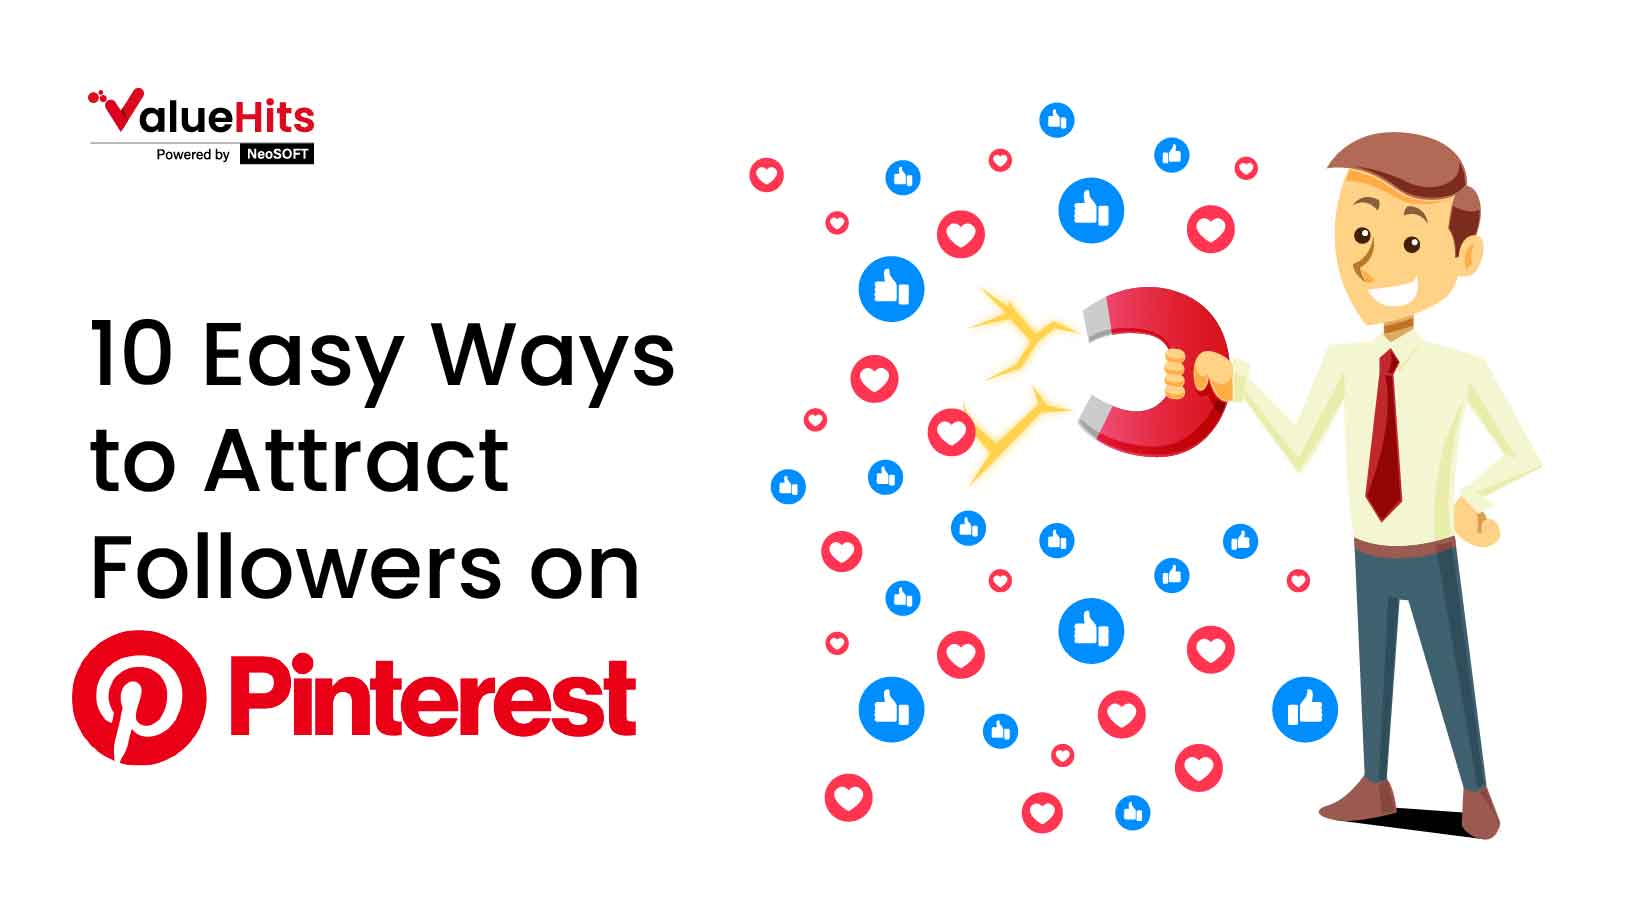 10 Easy Ways to Attract Followers on Pinterest